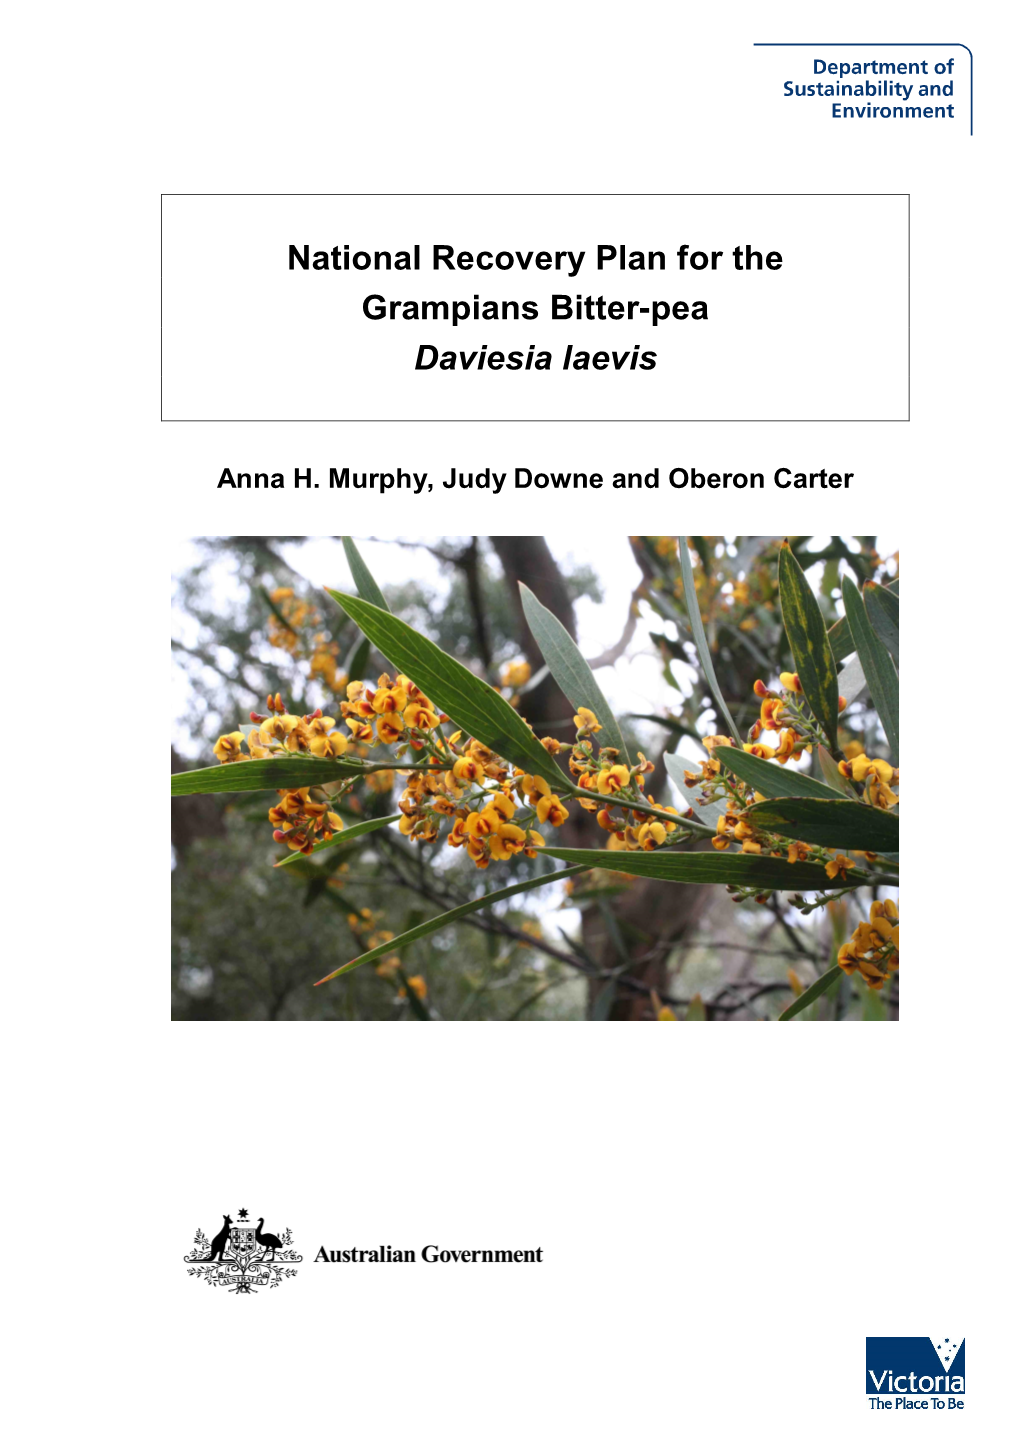 National Recovery Plan for the Grampians Bitterpea Daviesia Laevis